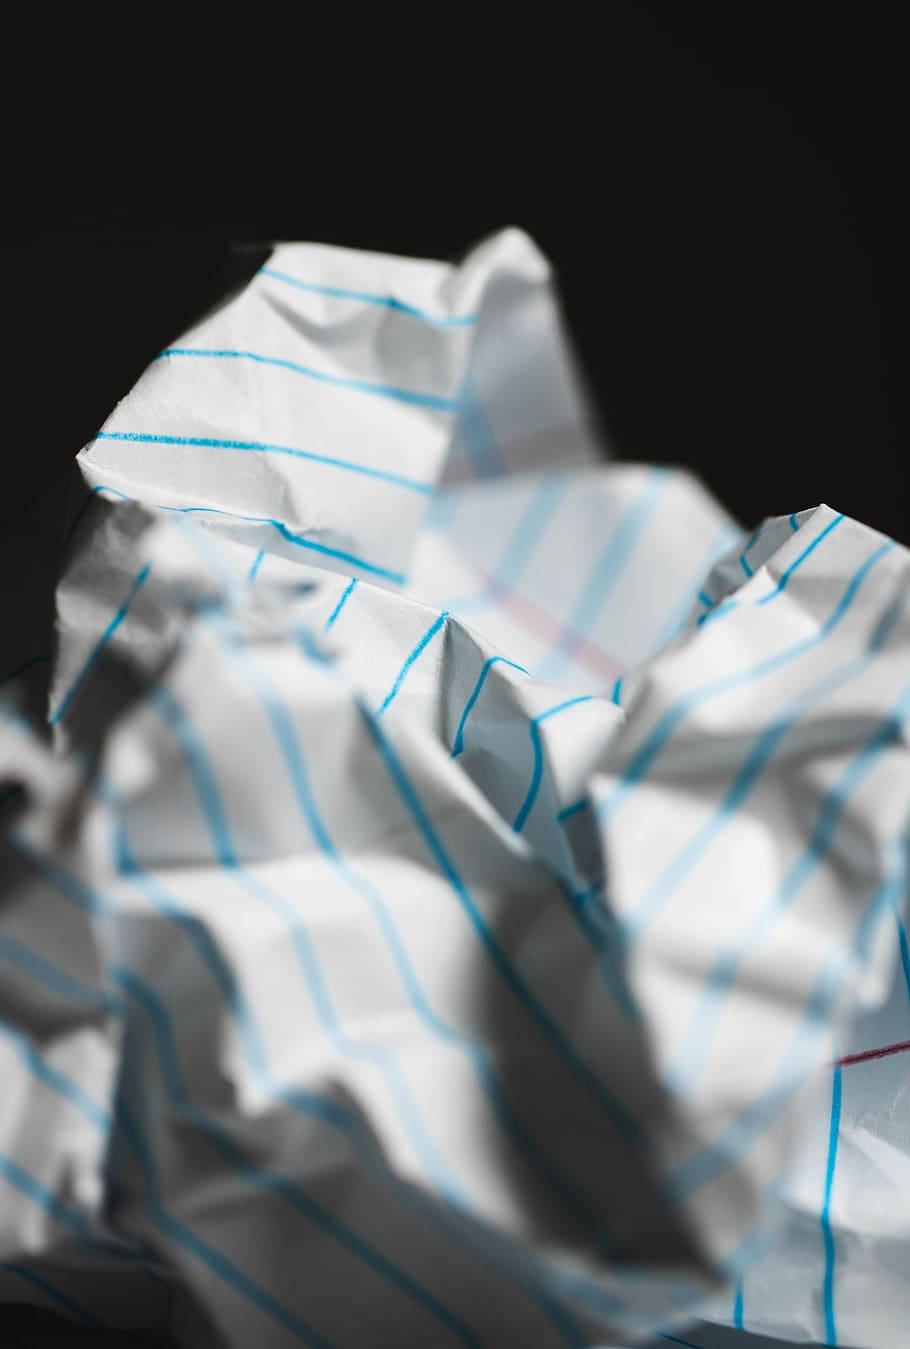 Caption: The Art of Simplicity: Crumpled Paper Layout Wallpaper